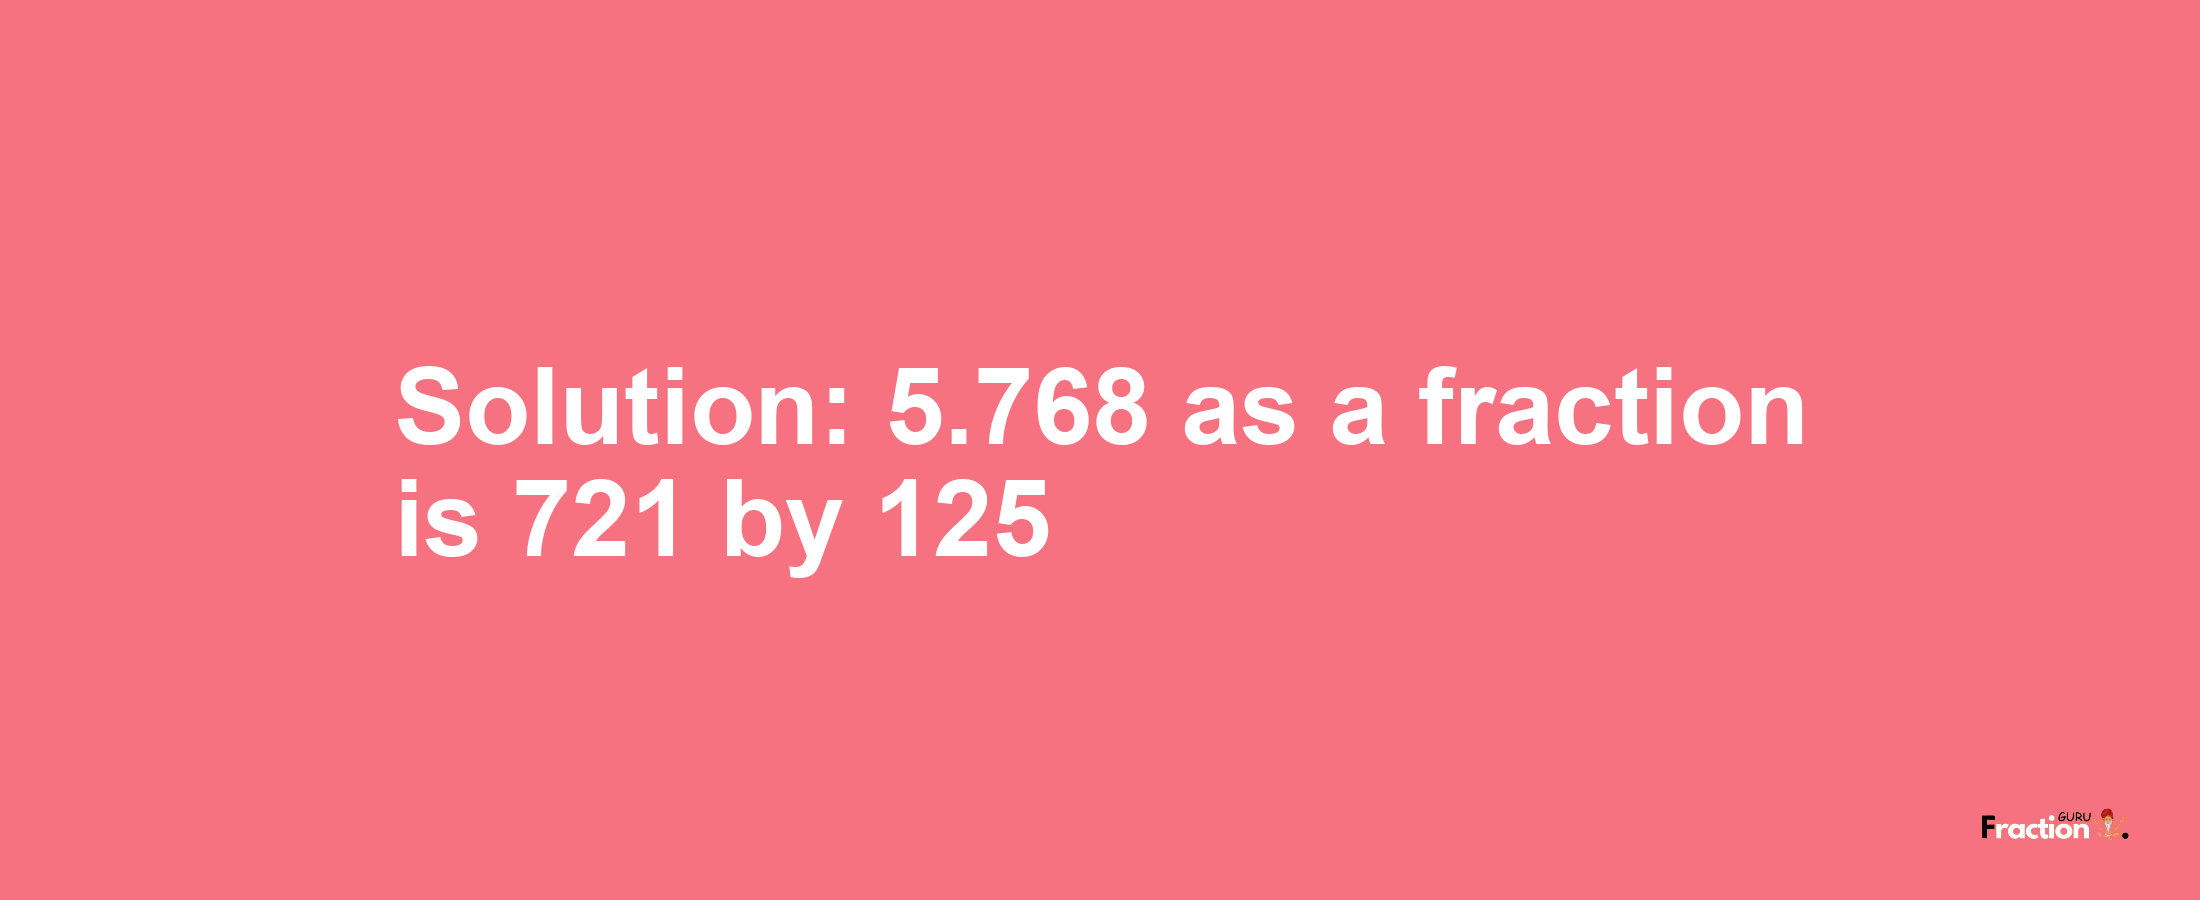 Solution:5.768 as a fraction is 721/125